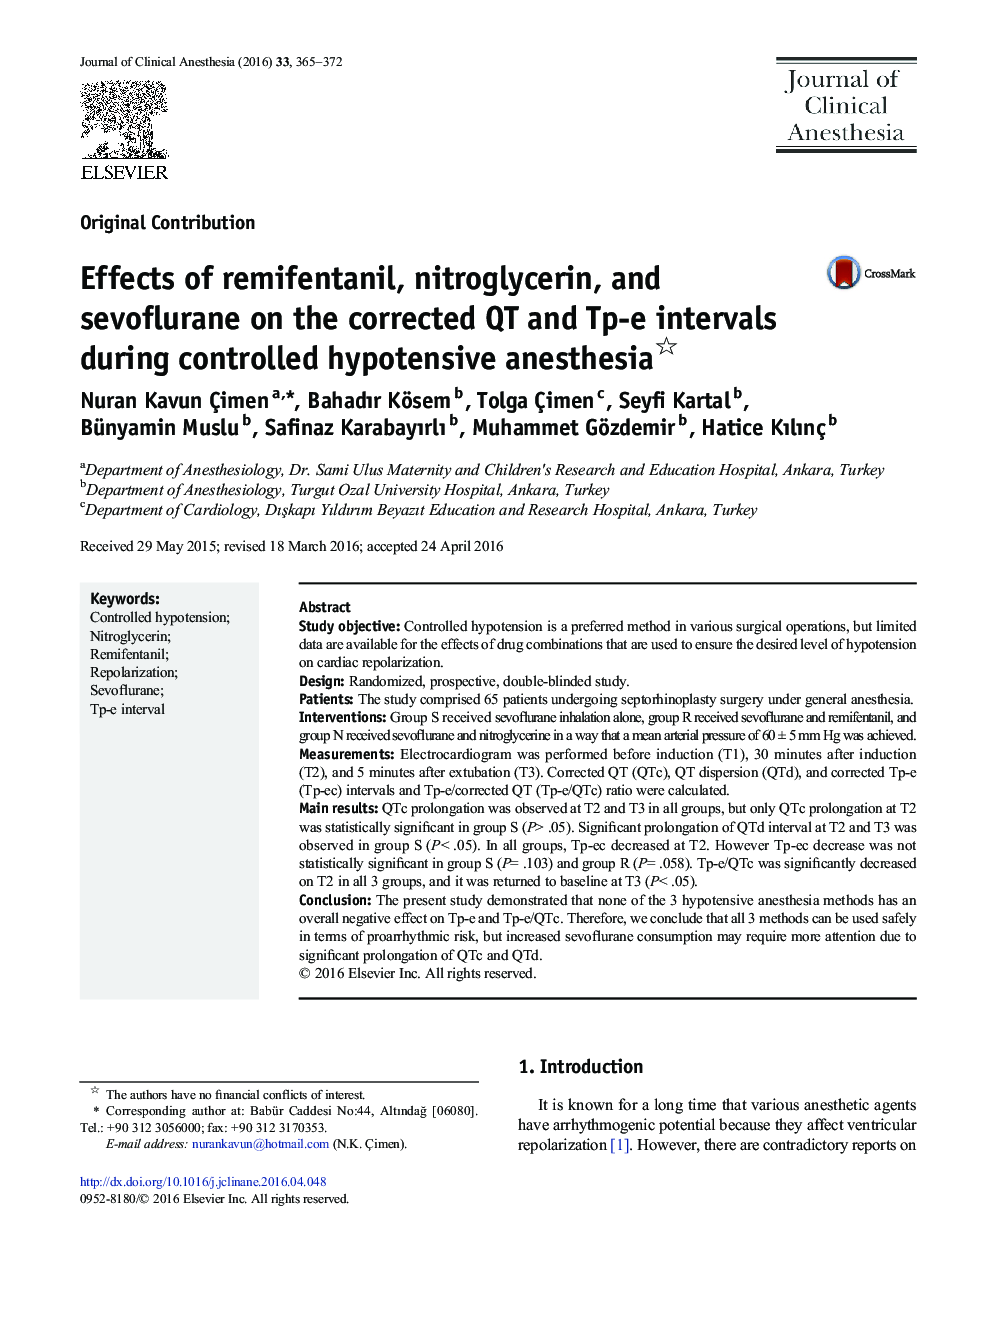 Effects of remifentanil, nitroglycerin, and sevoflurane on the corrected QT and Tp-e intervals during controlled hypotensive anesthesia 